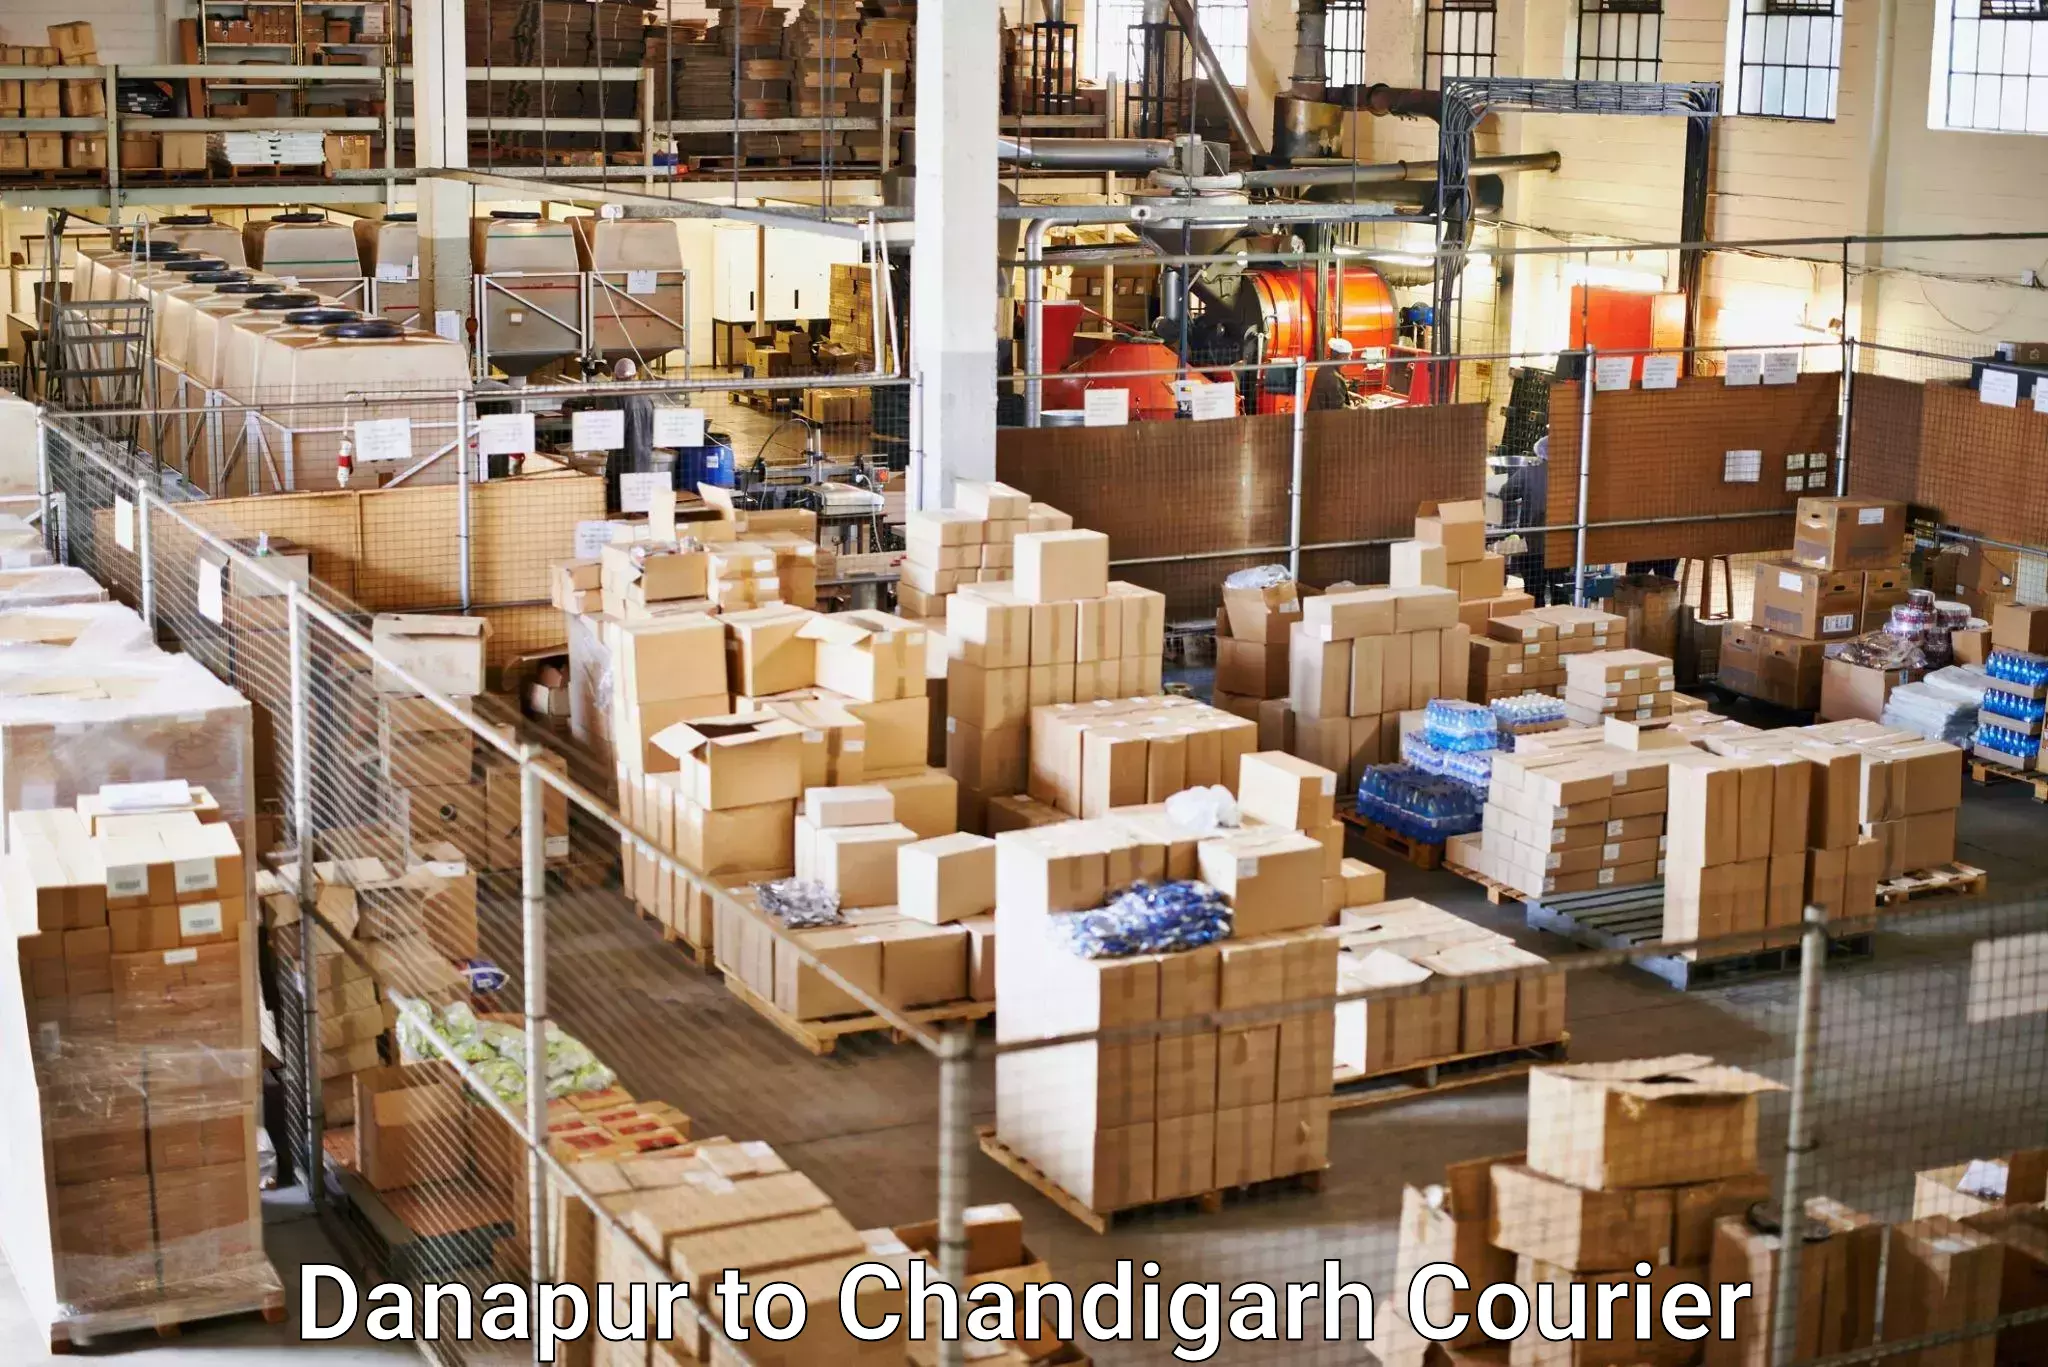 Business delivery service Danapur to Chandigarh